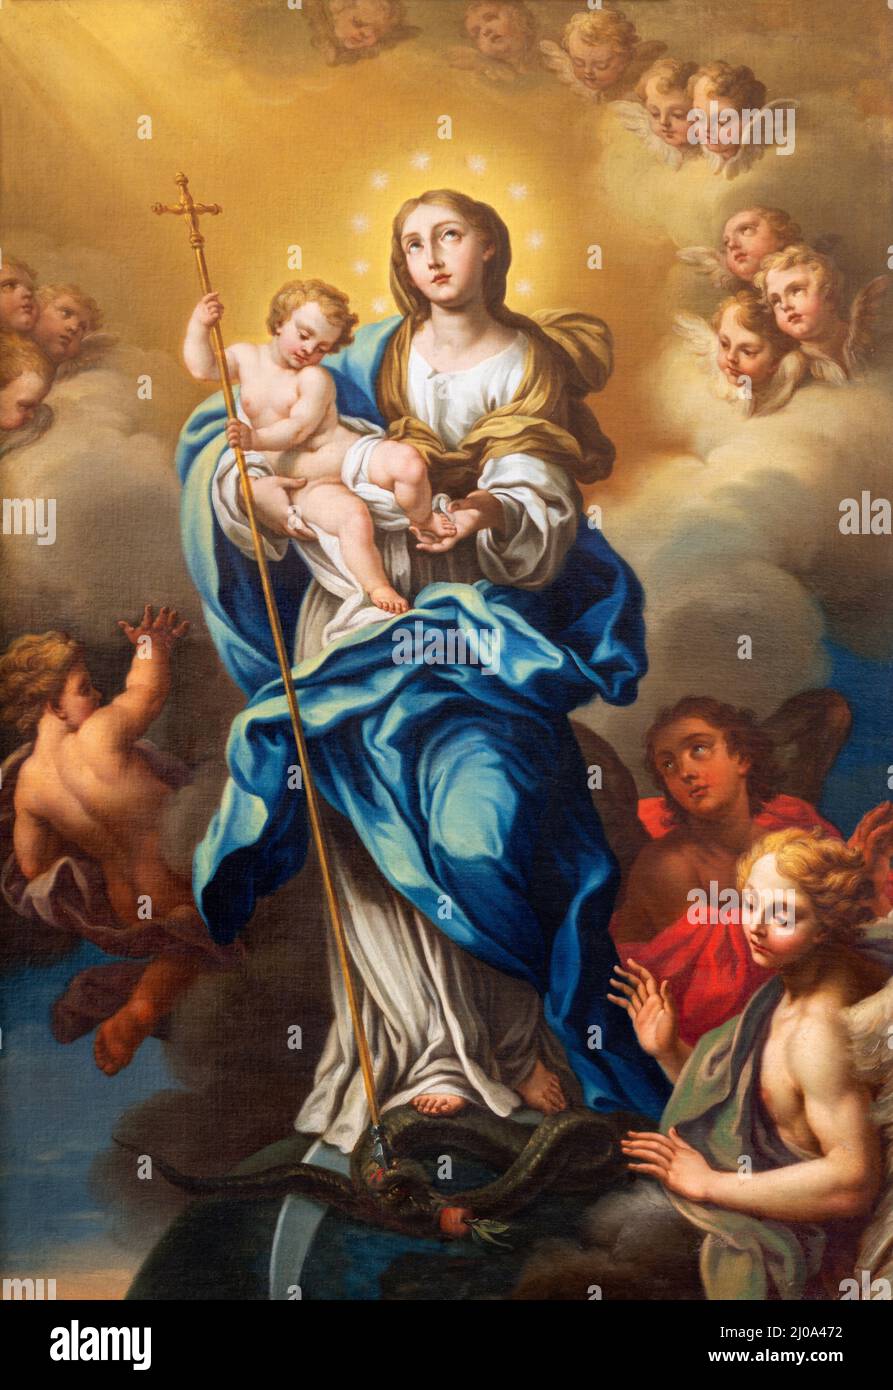 MATERA, ITALY - MARCH 7, 2022: The painting of Madonna as Immaculate Conception in the church Chiesa di Santa Chiara (18. cent.). Stock Photo